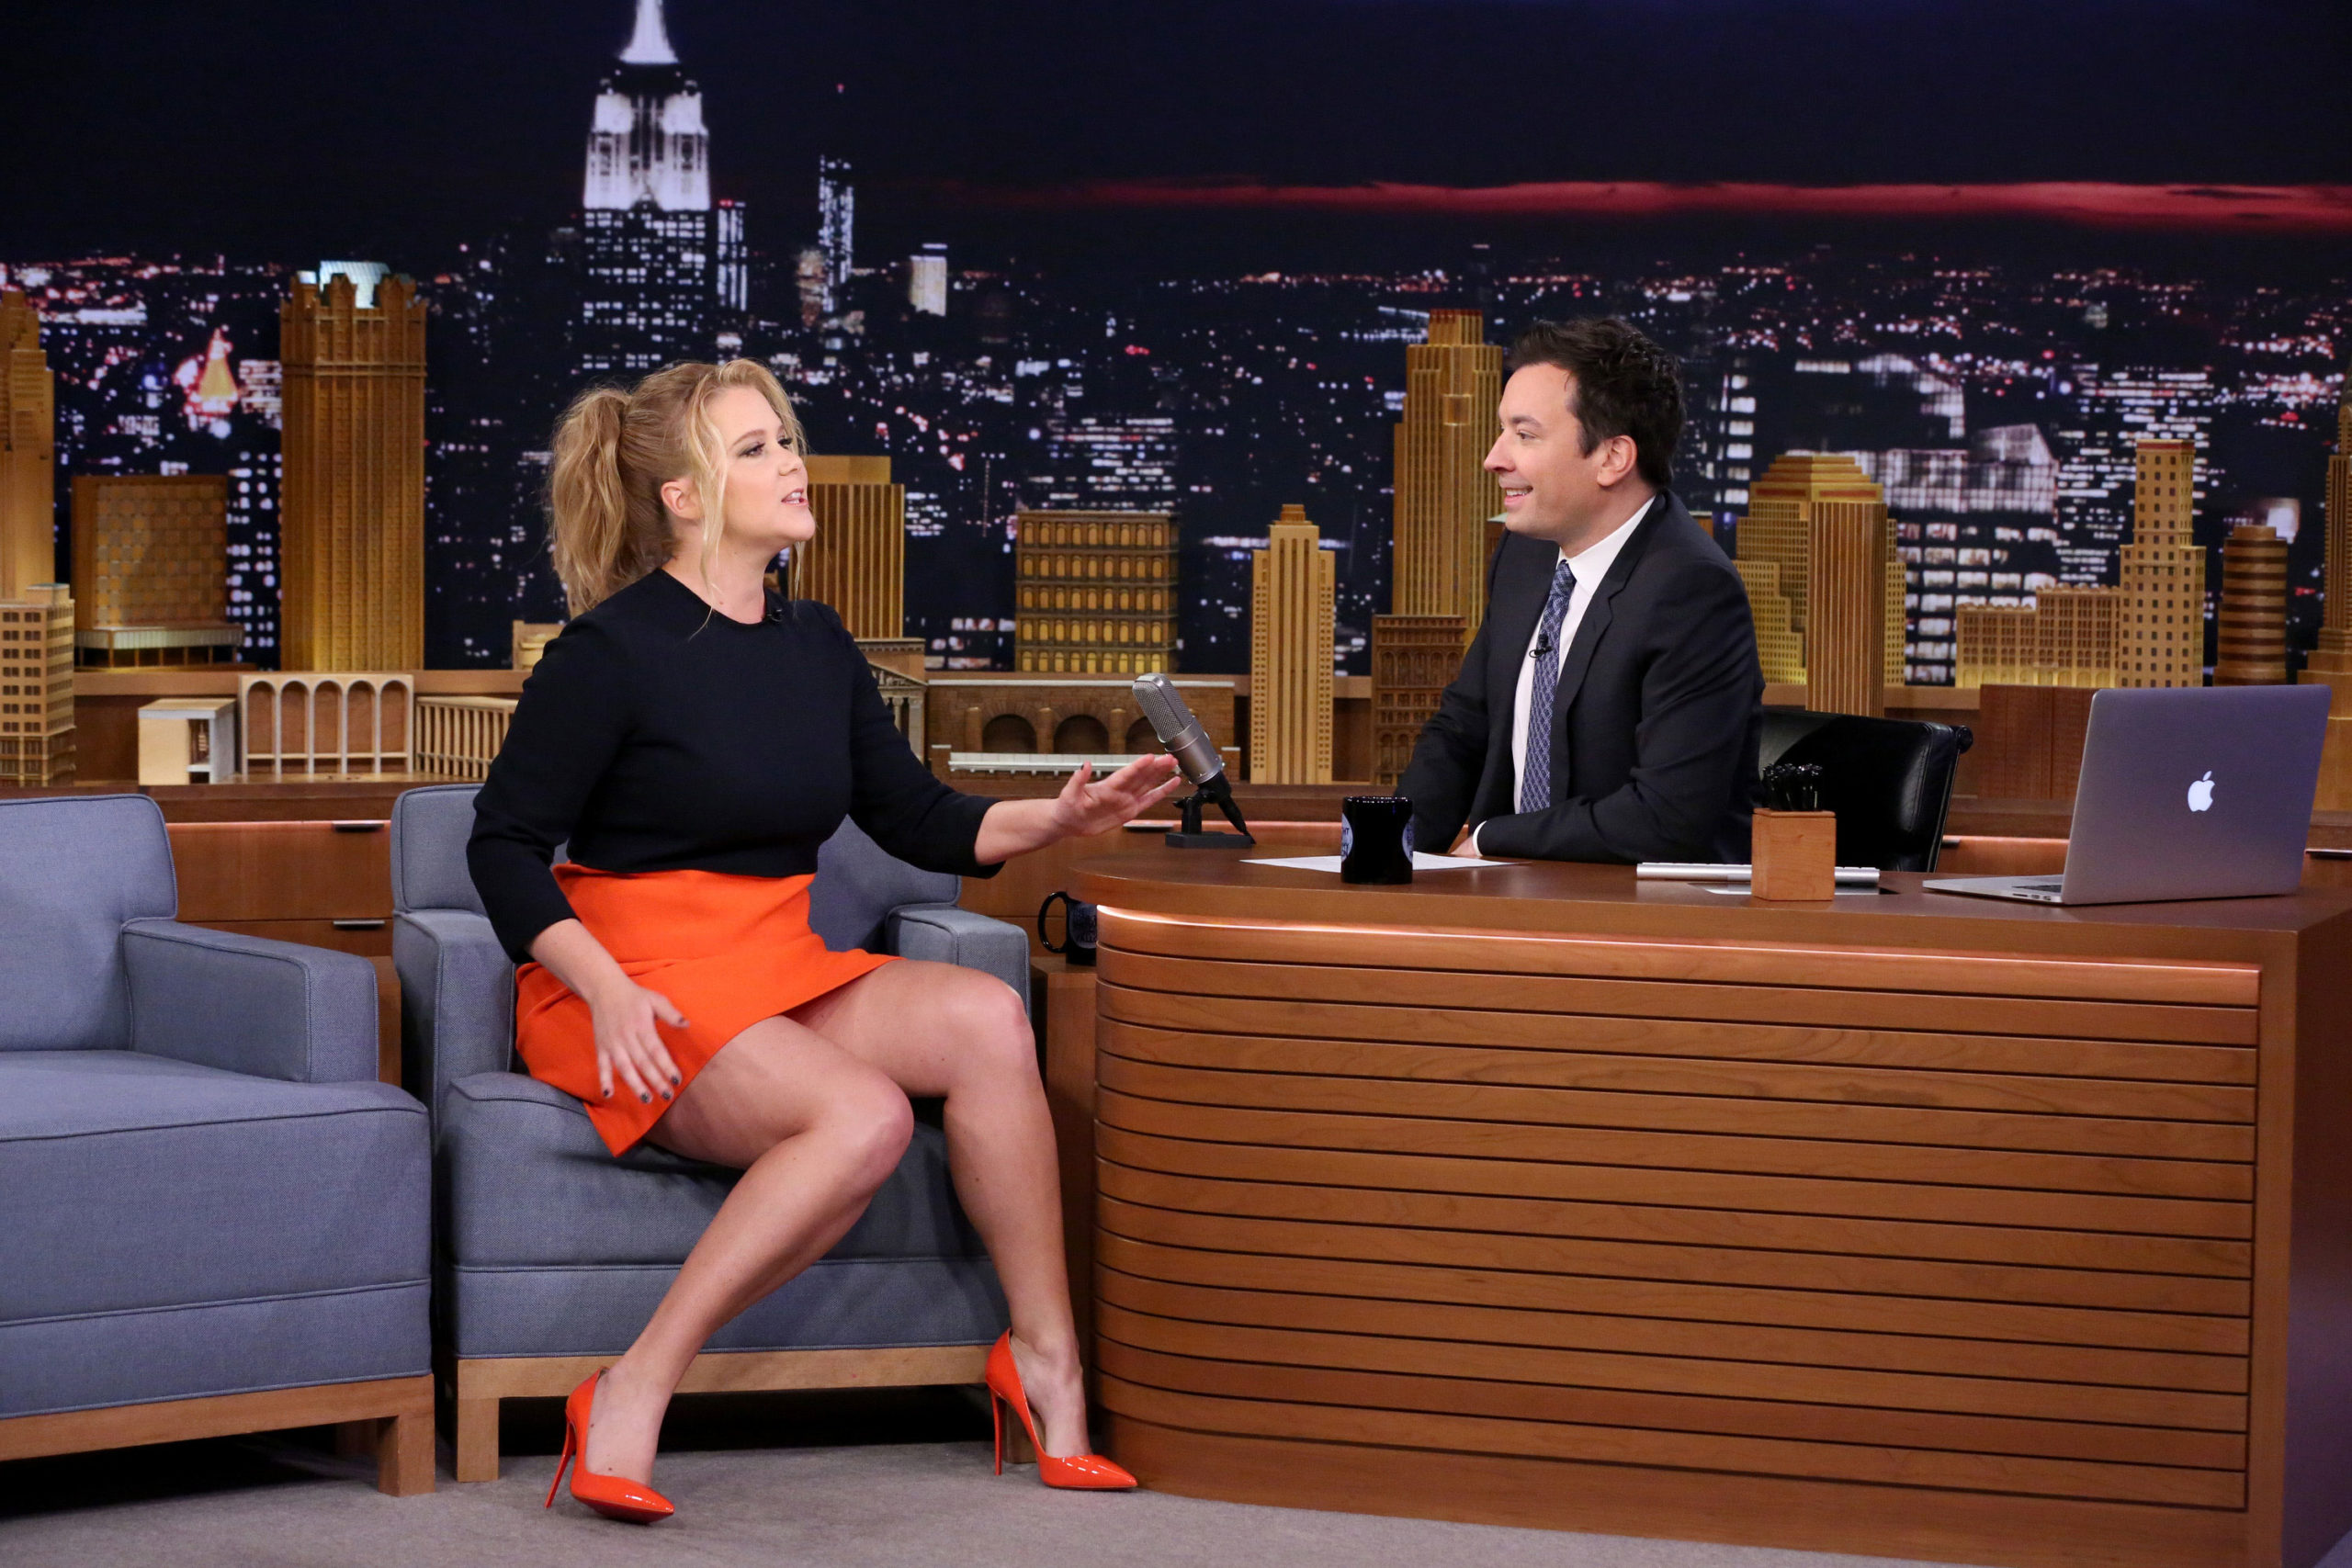 Amy Schumer on The Tonight Show with Jimmy Fallon